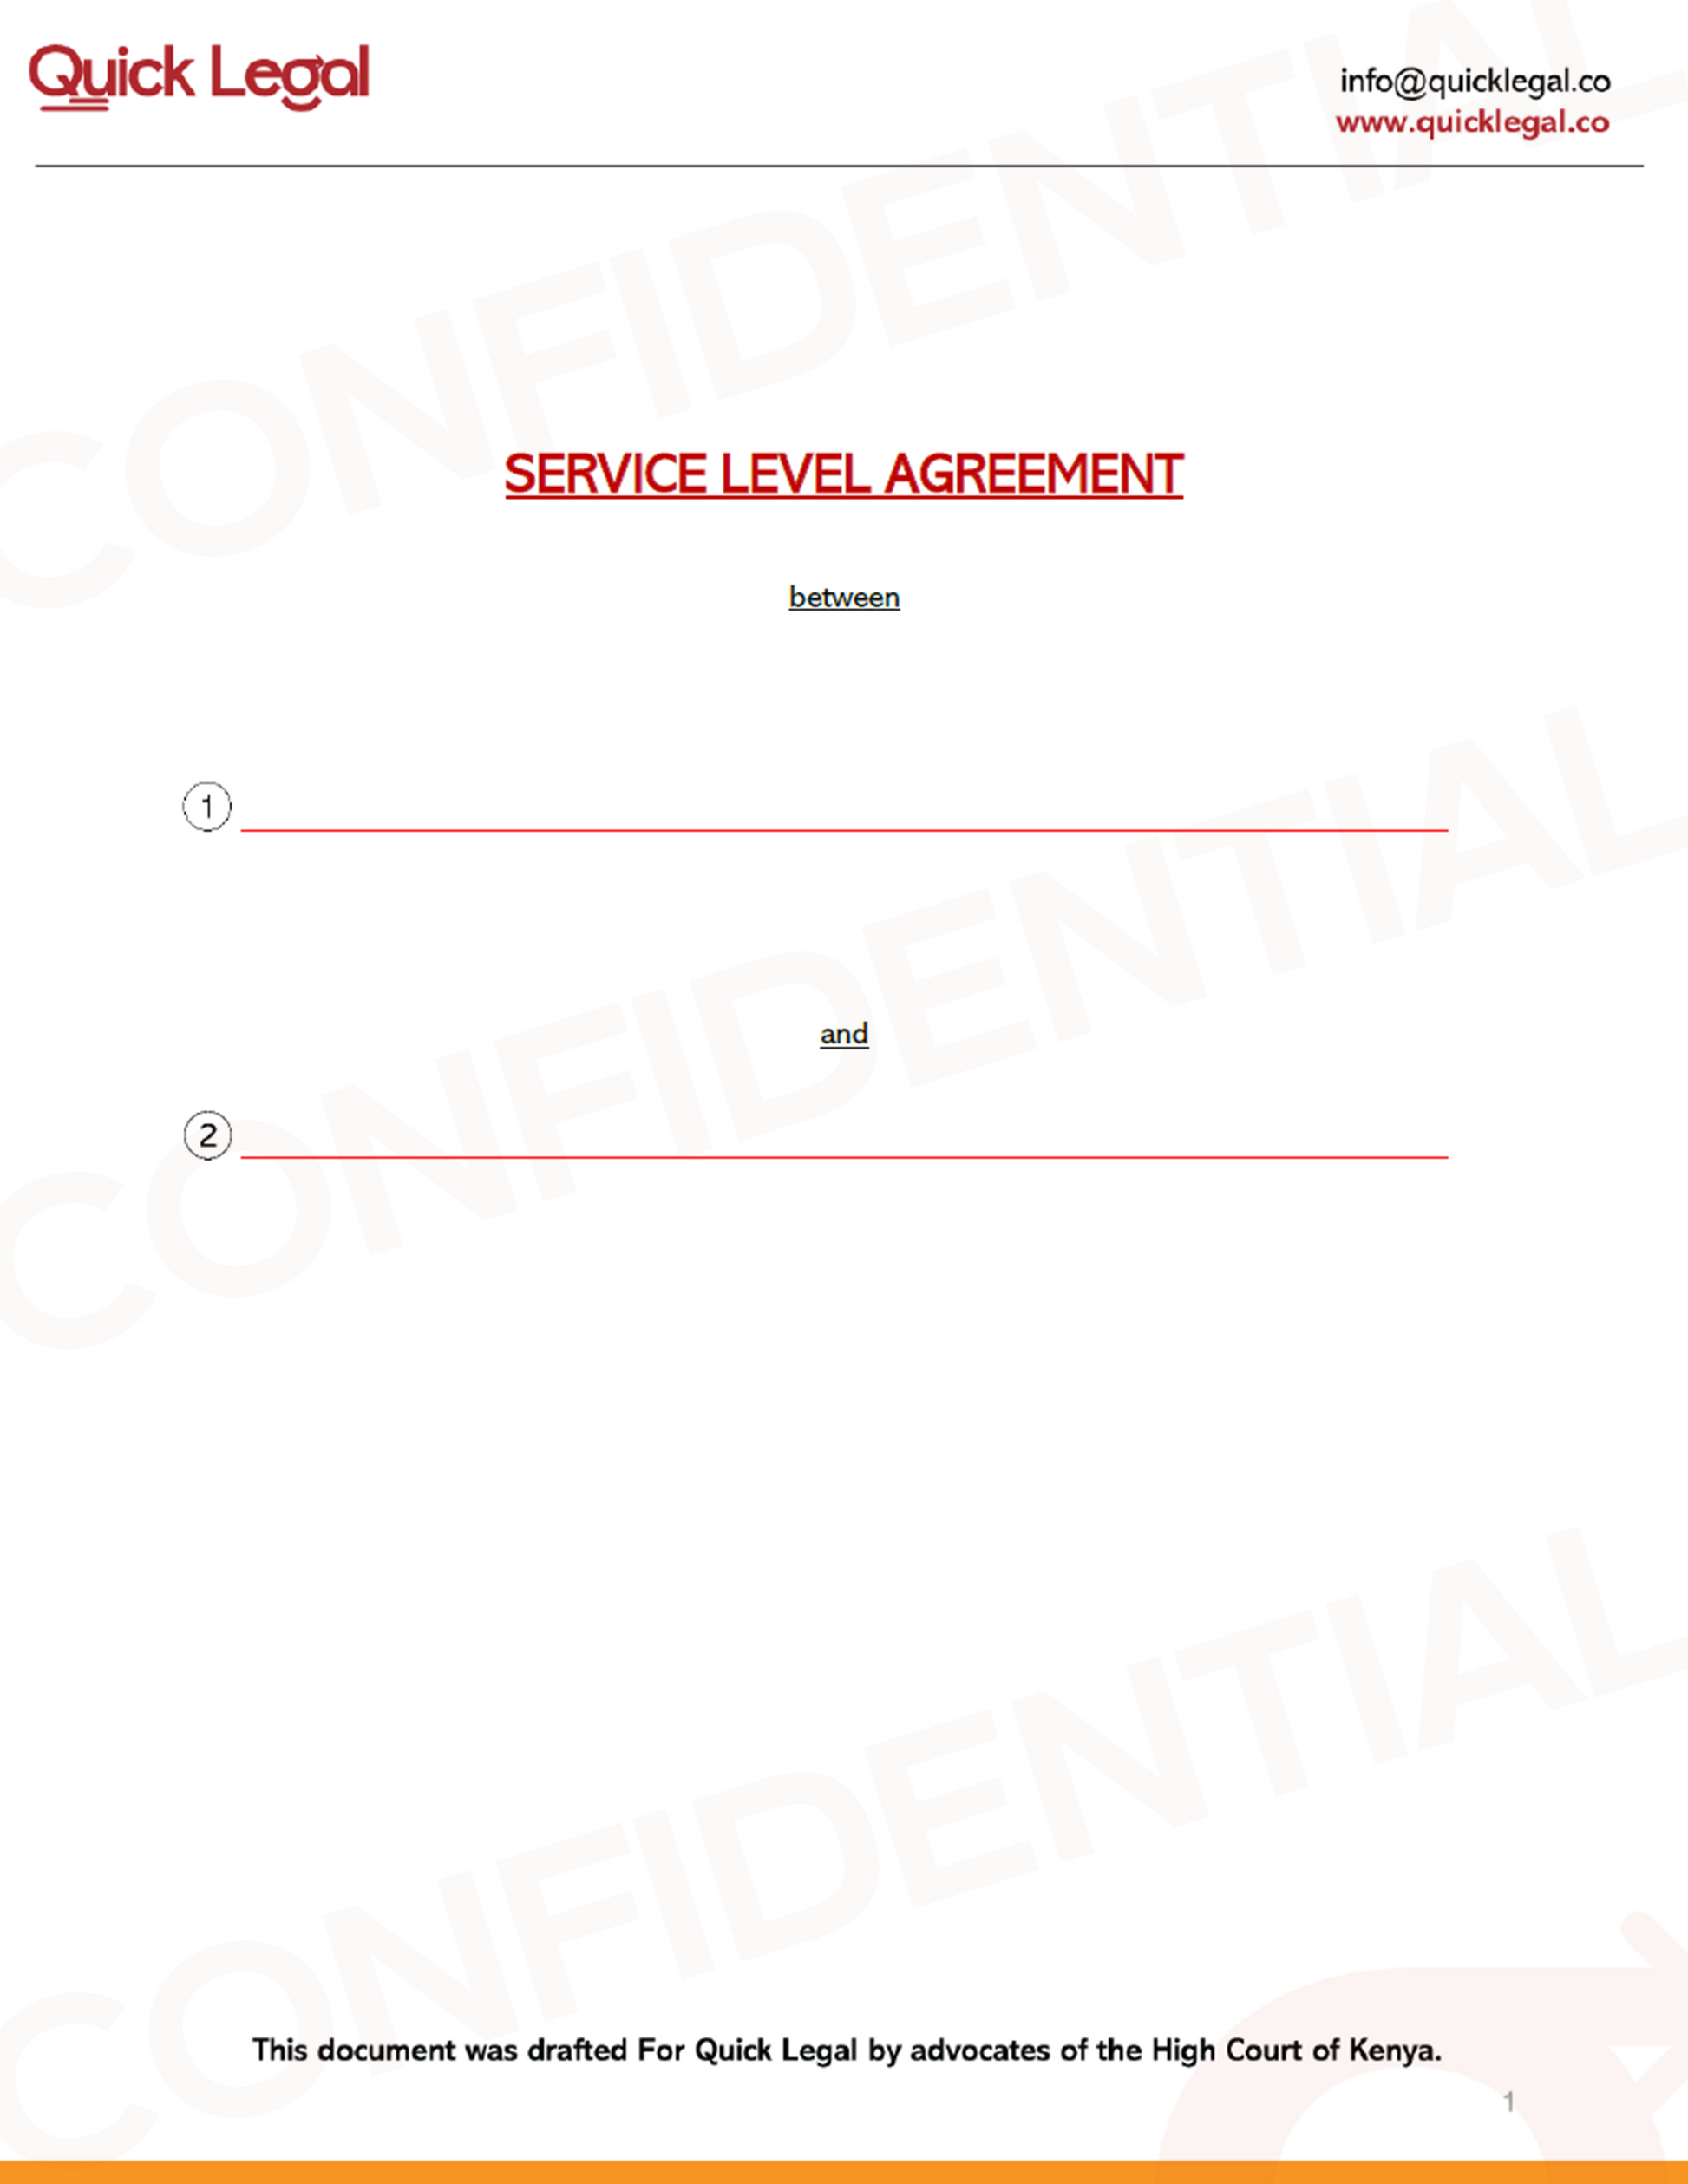 SLA Business Contract - Clear service expectations and agreements